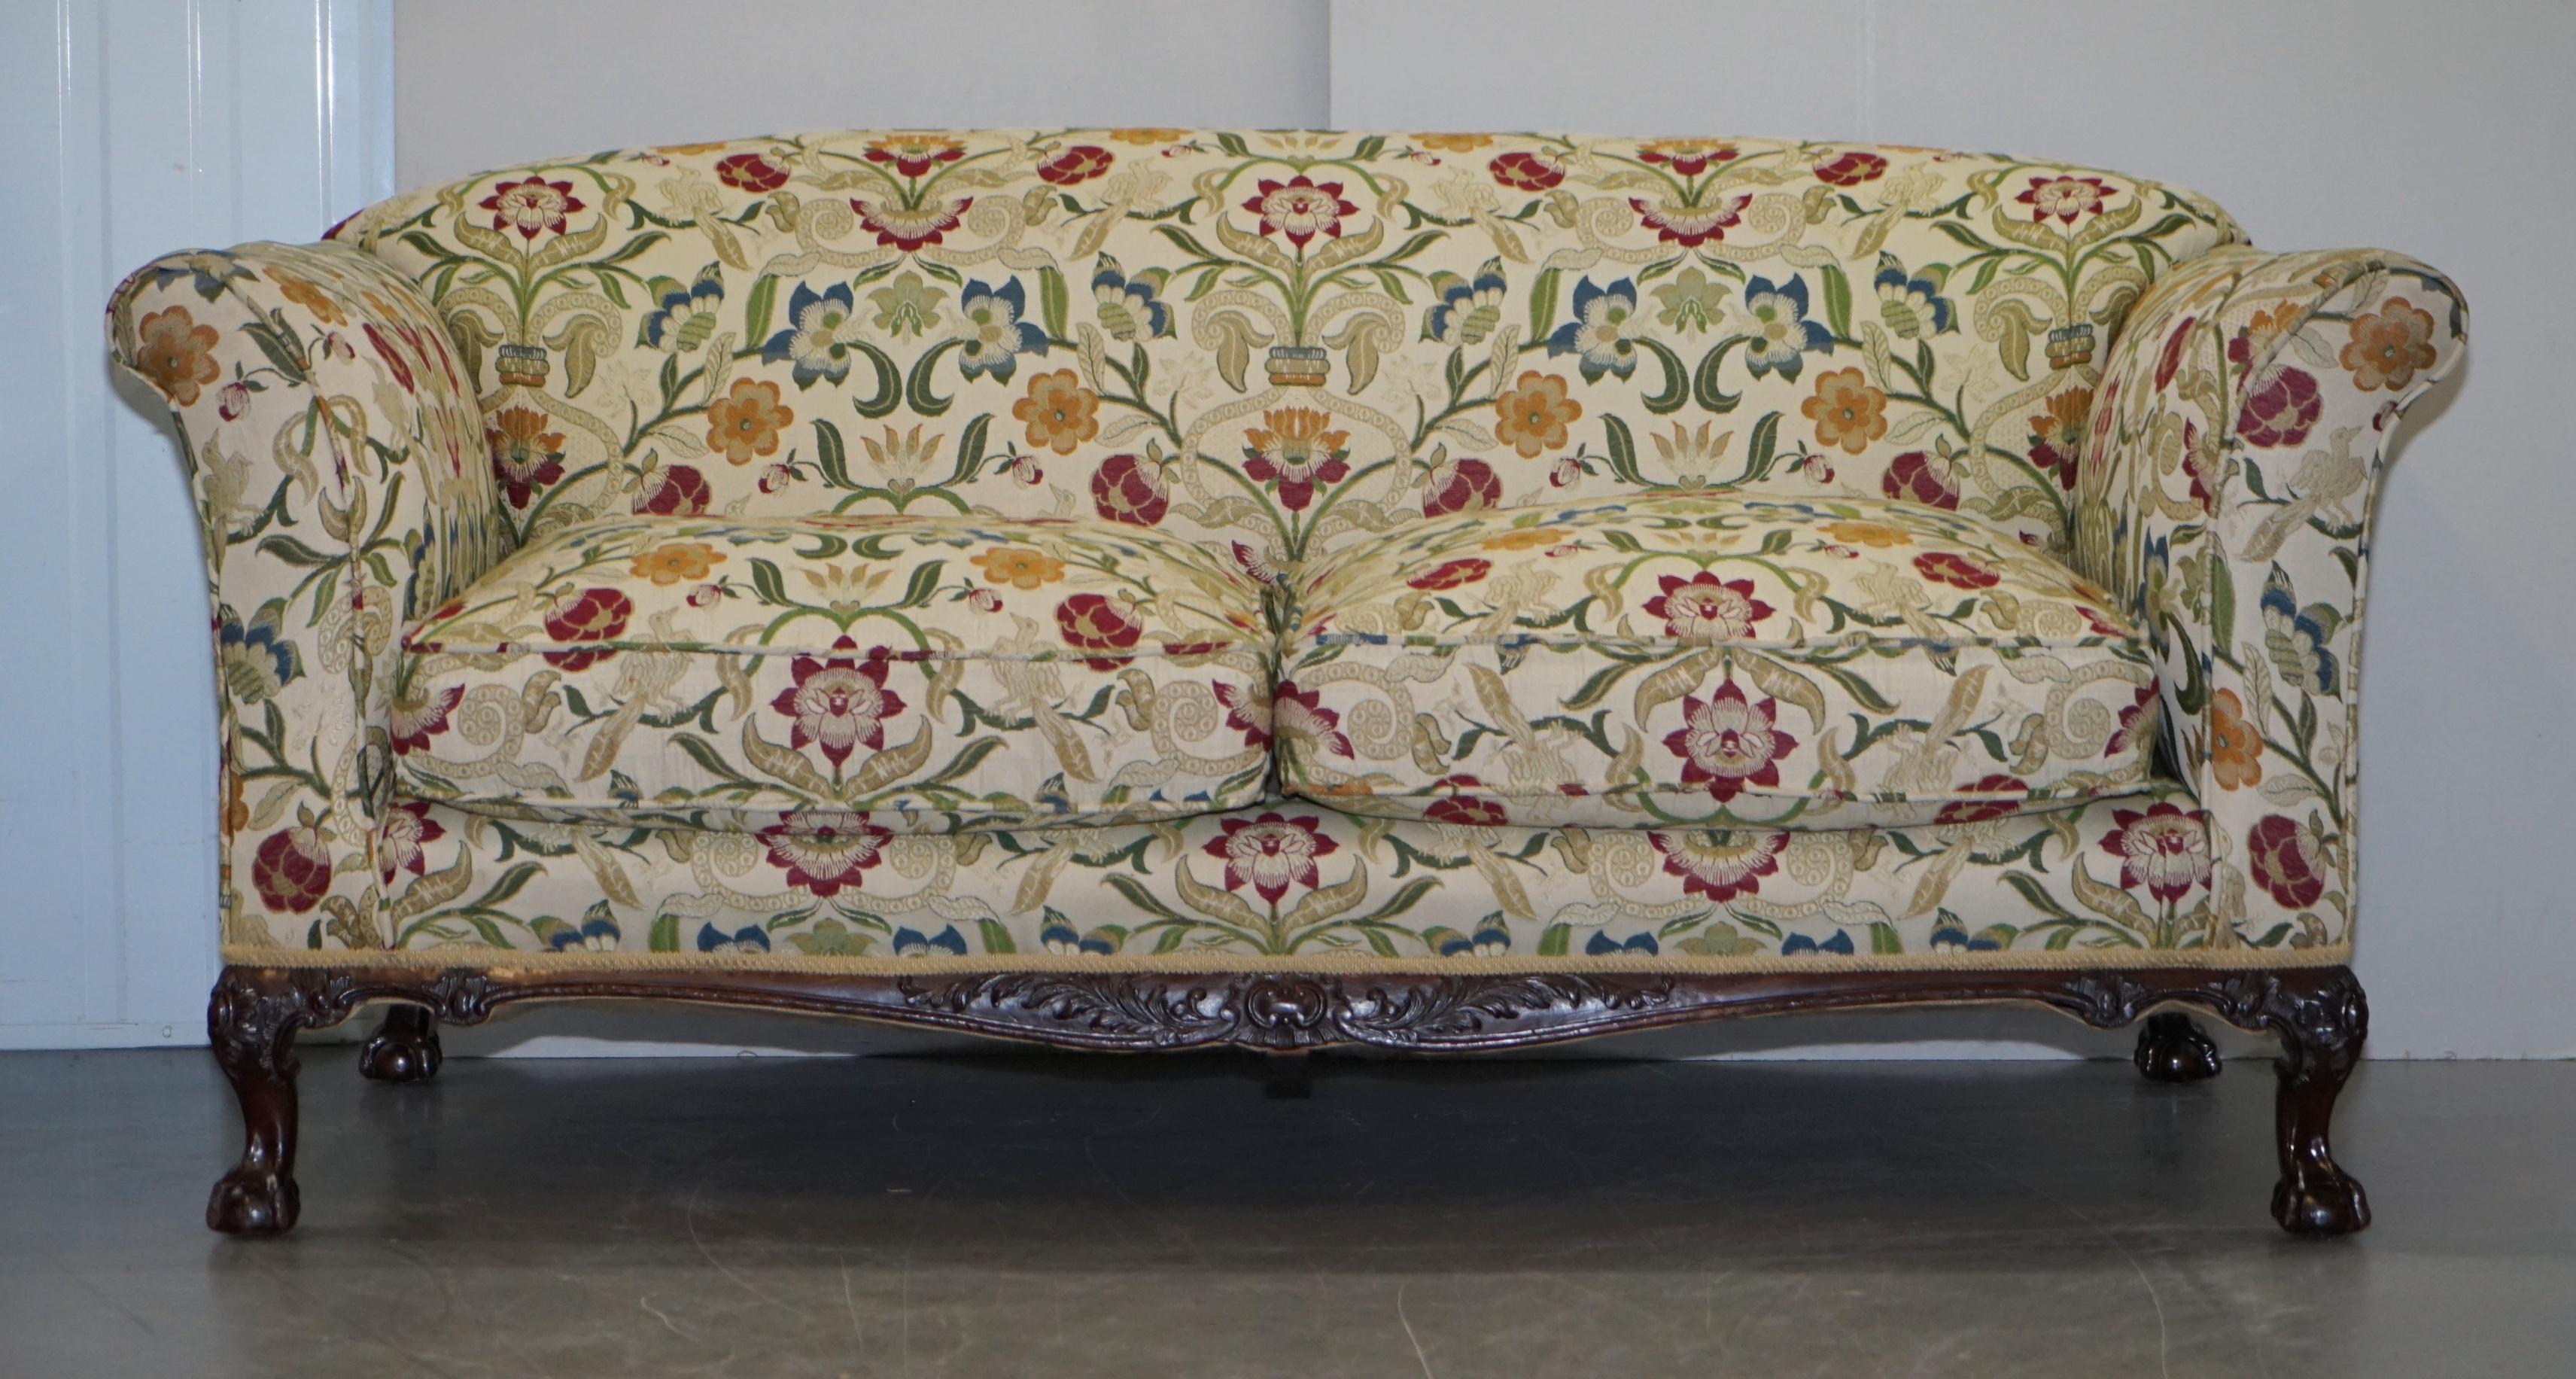 We are delighted to offer for sale this stunning exceptionally rare original Victorian walnut framed Claw & Ball feet Howard & Son’s Berners Street stamped sofa with the original feather filled cushions, horse hair filling and William Morris